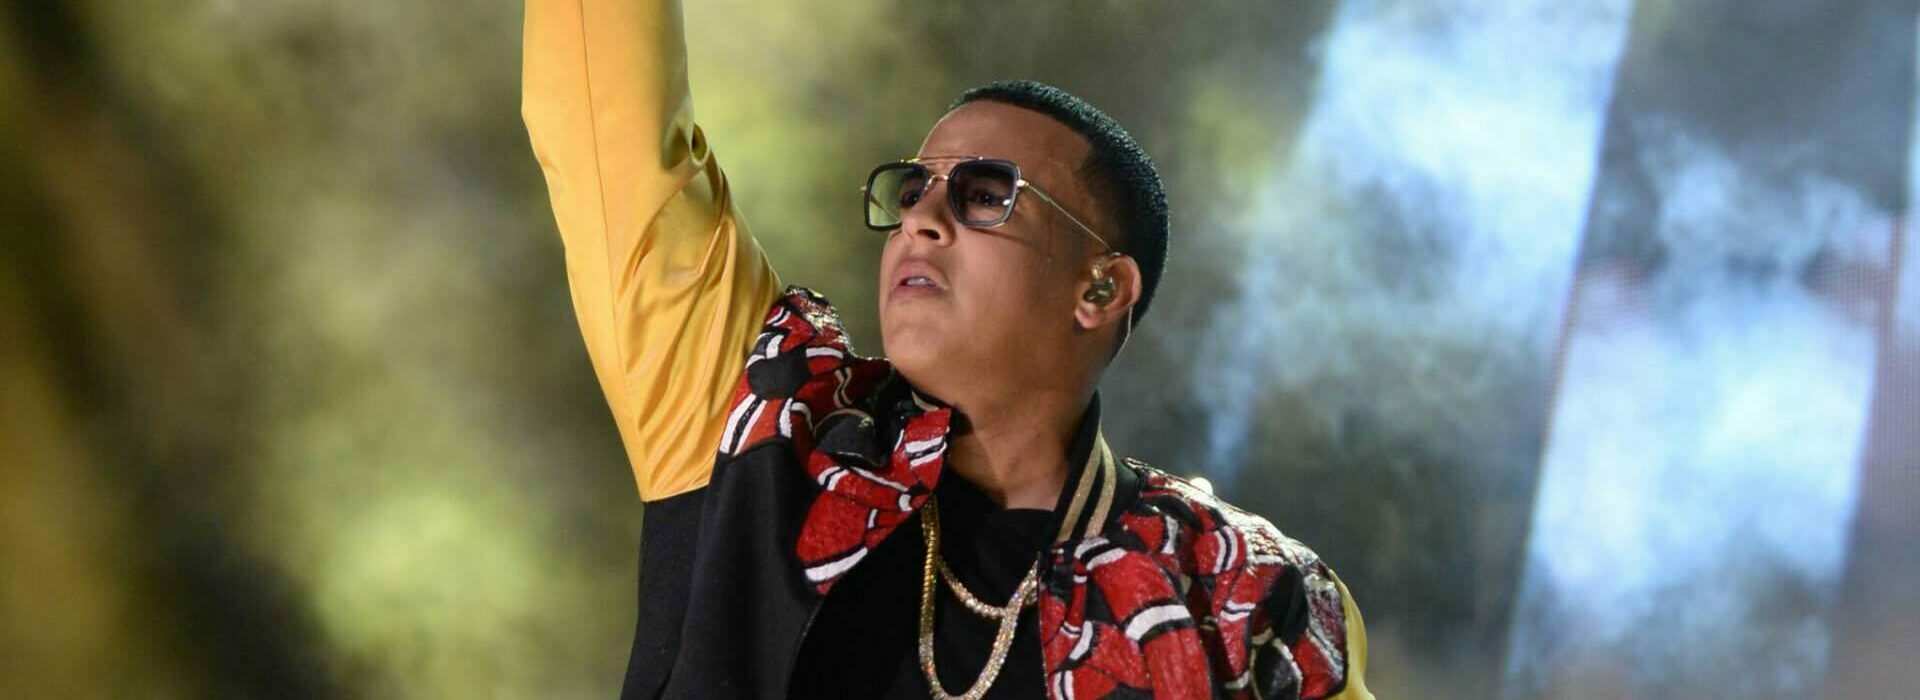 Daddy Yankee announces devotion to faith after final concert